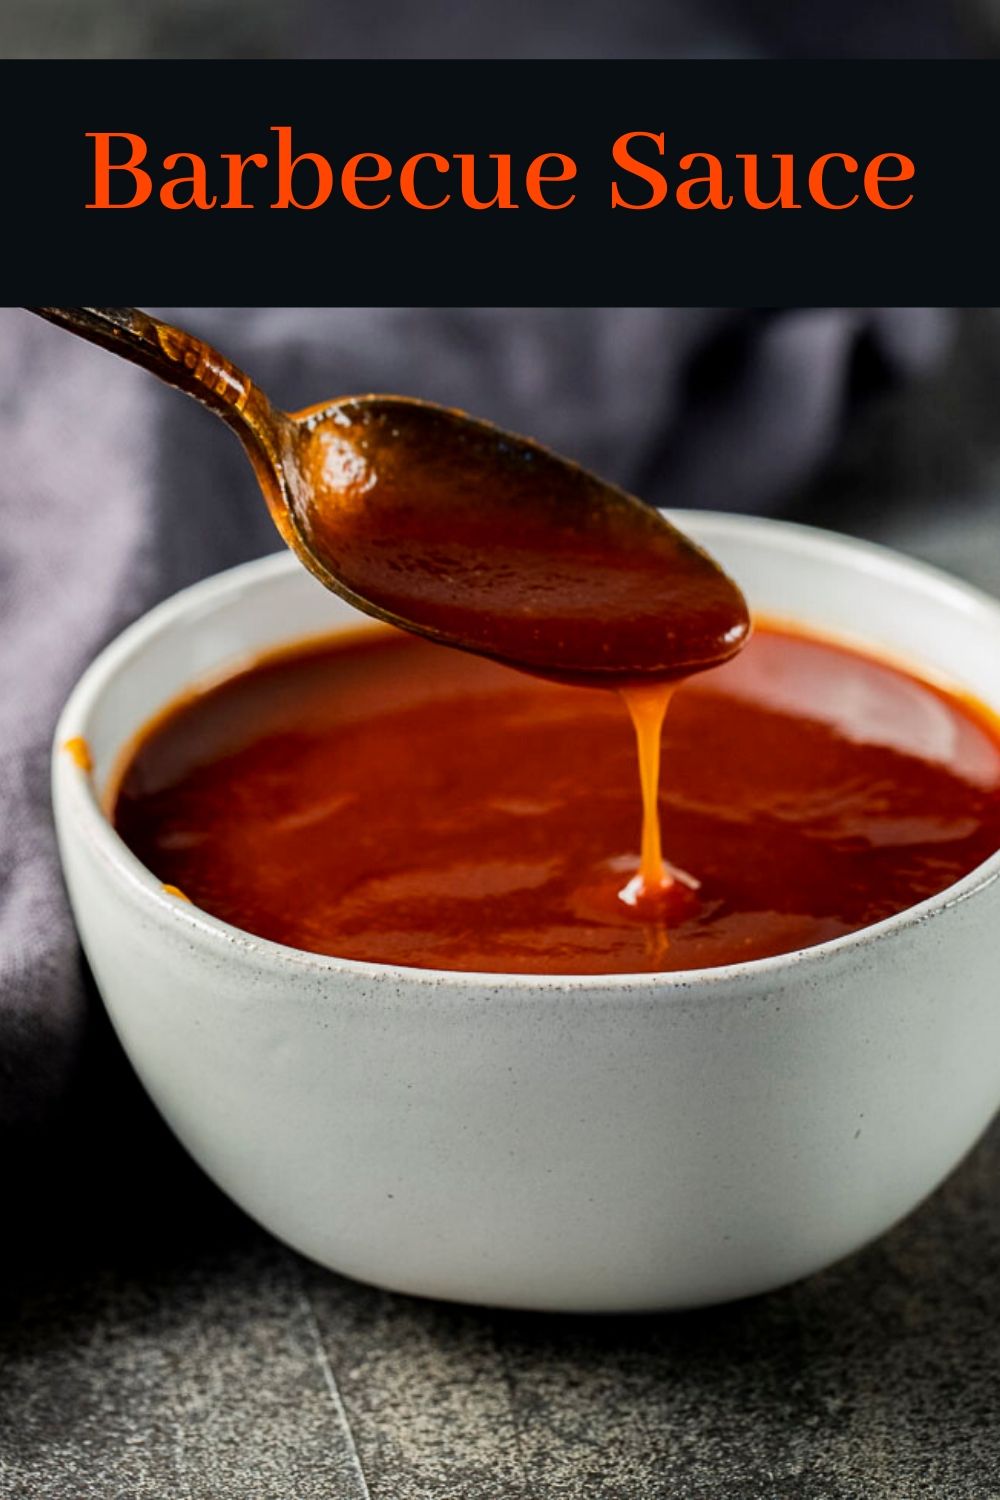 https://www.wenthere8this.com/wp-content/uploads/2018/03/Homemade-Barbecue-Sauce-PINTEREST1.jpg